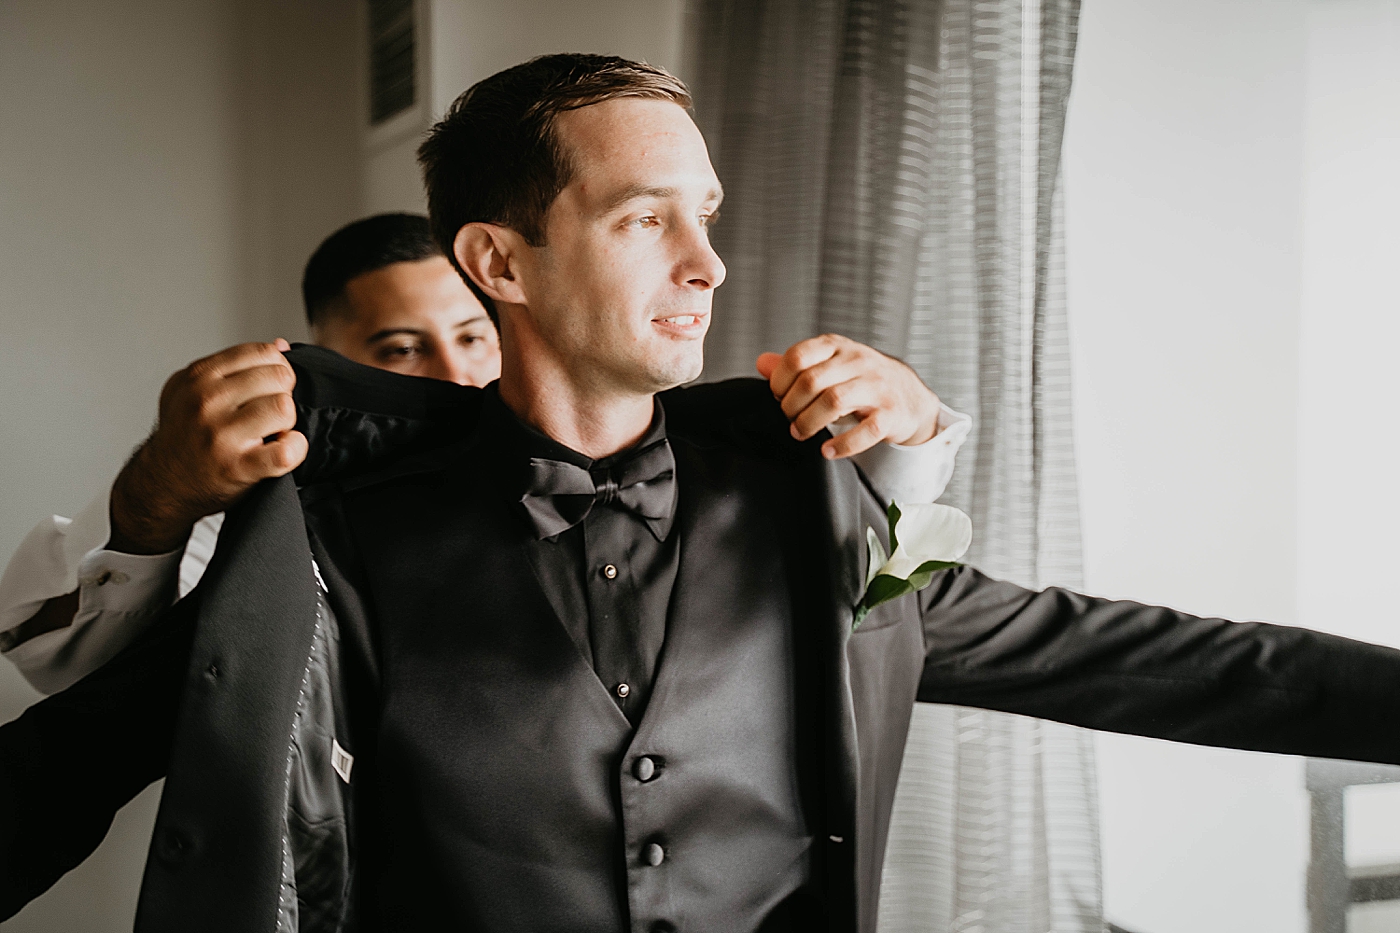 Groom getting ready putting jacket on Waterstone Resort and Marina Wedding captured by South Florida Wedding Photographer Krystal Capone Photography